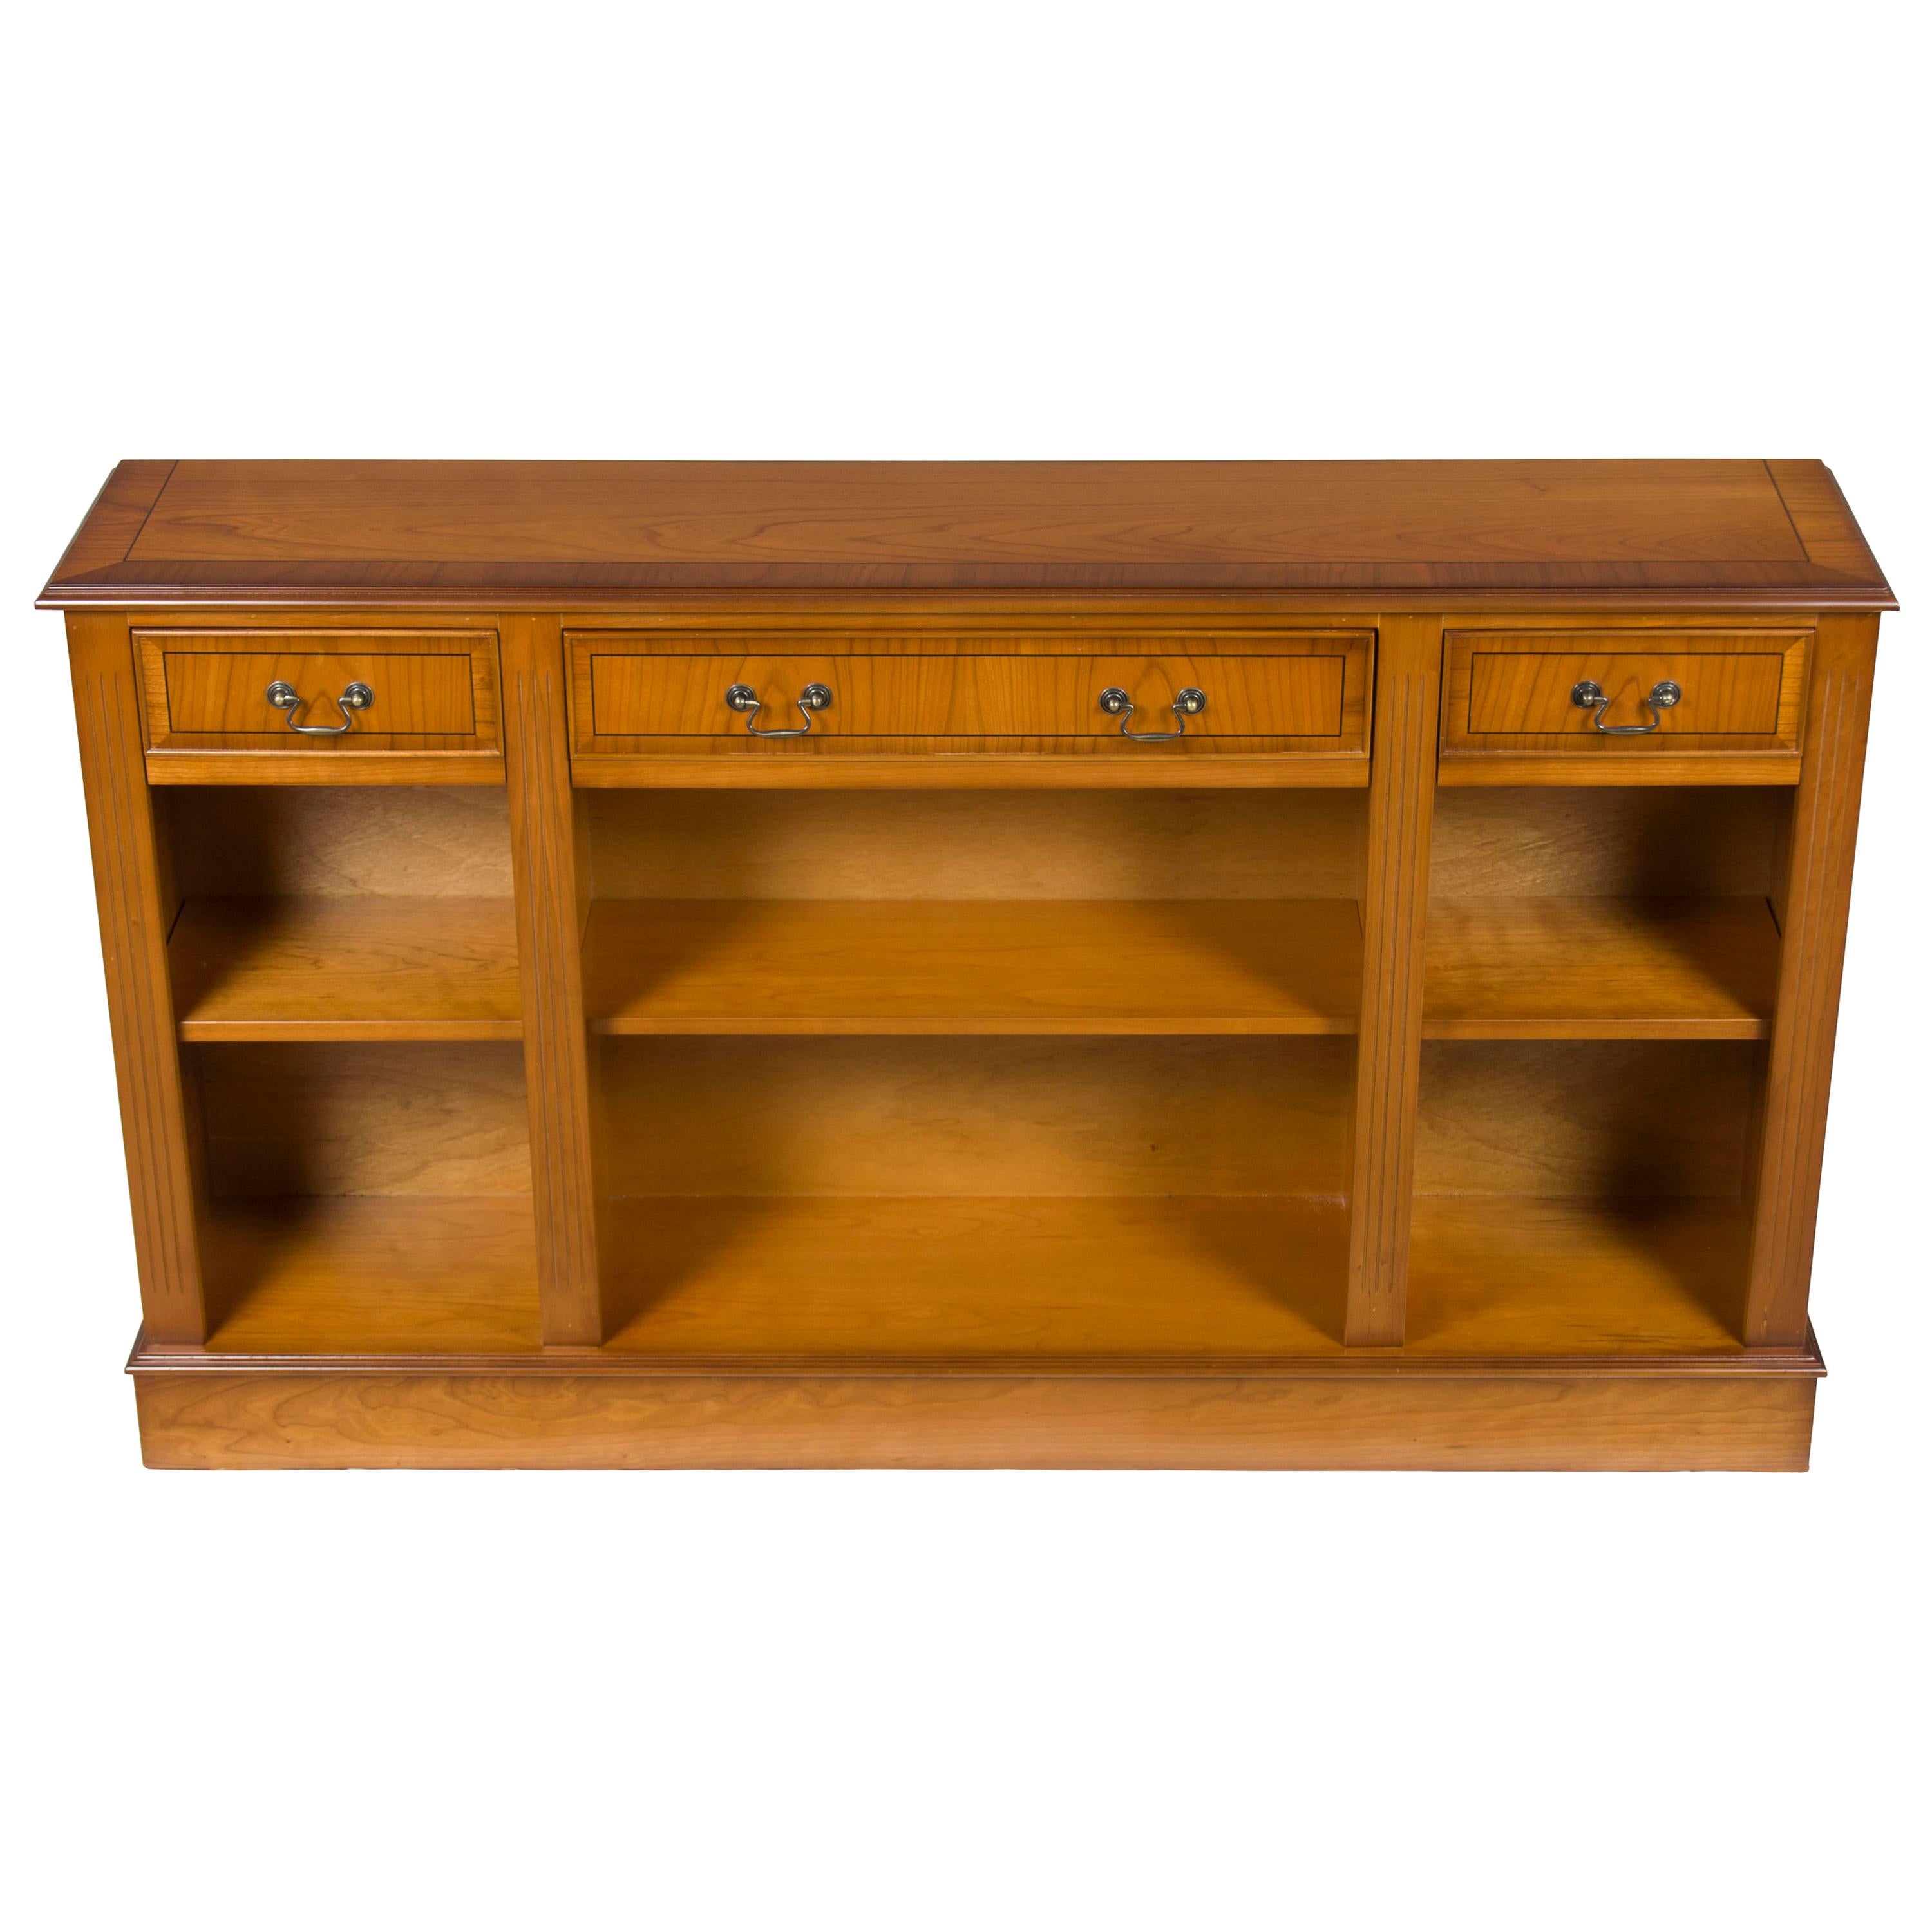 Low Adjustable Library Bookcase Bookshelf with Drawers For Sale